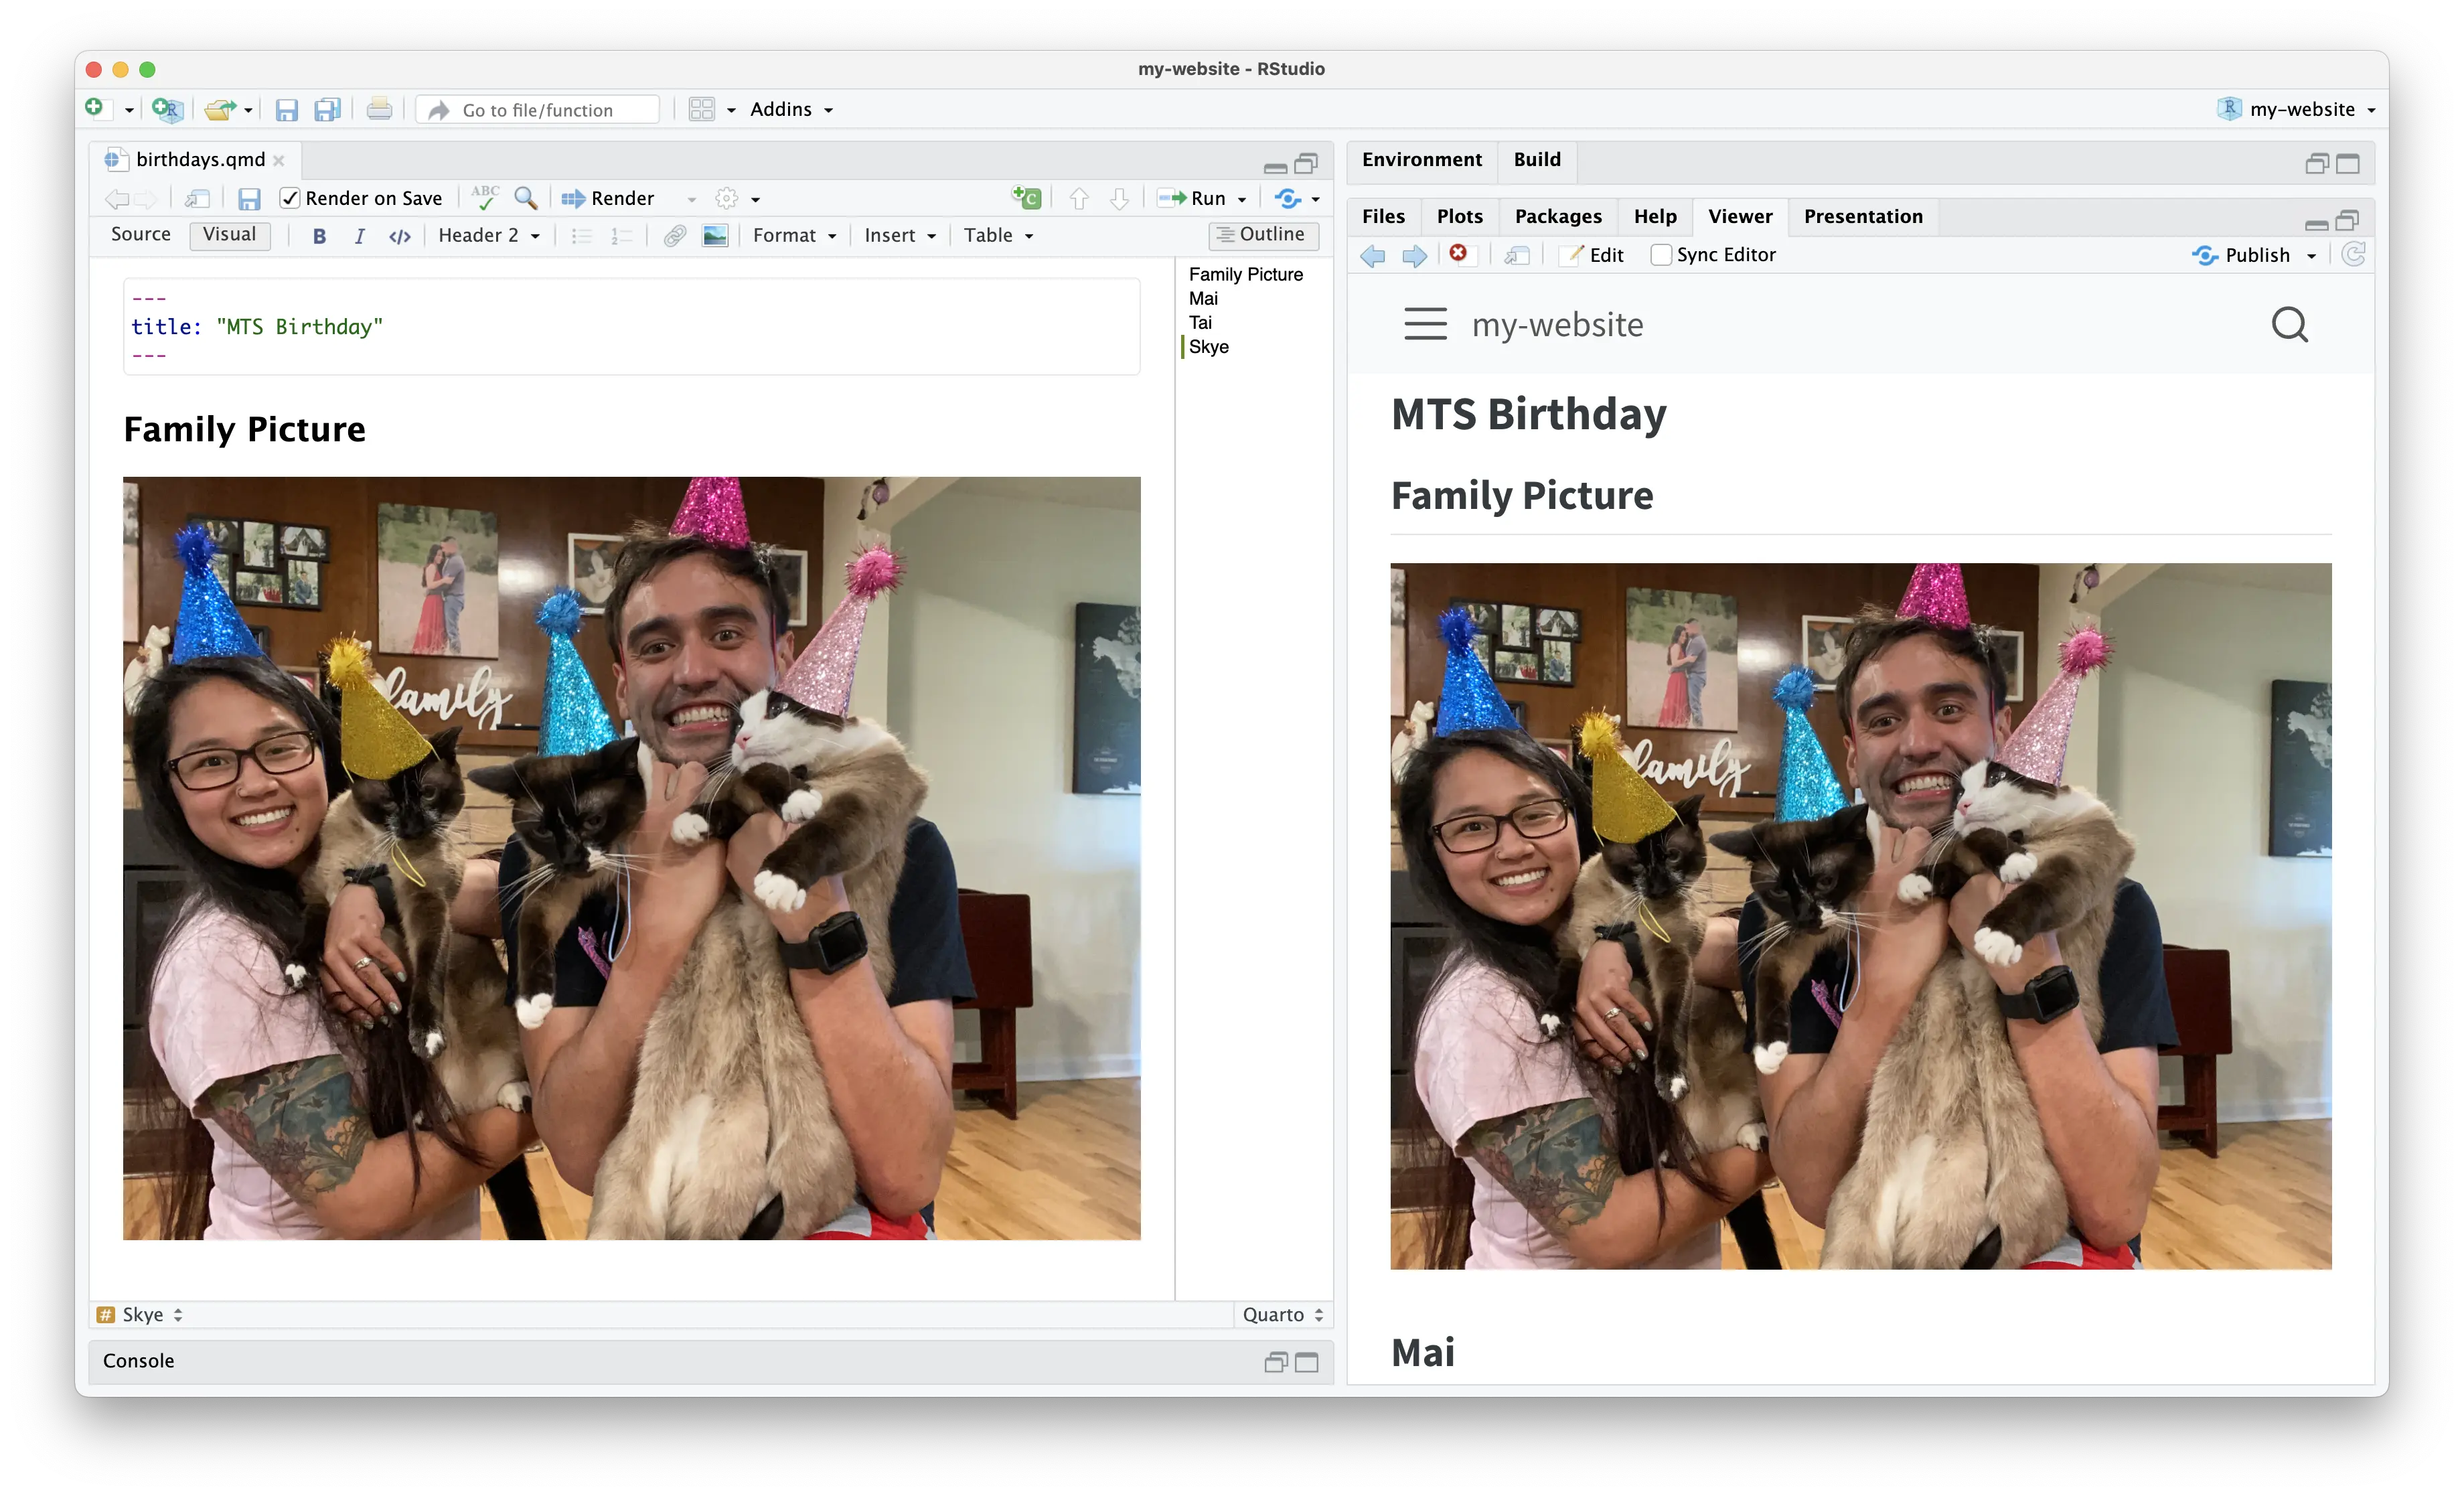 RStudio with the 'birthdays.qmd' file in Visual editor mode side by side with the website preview of the MTS Birthday page.